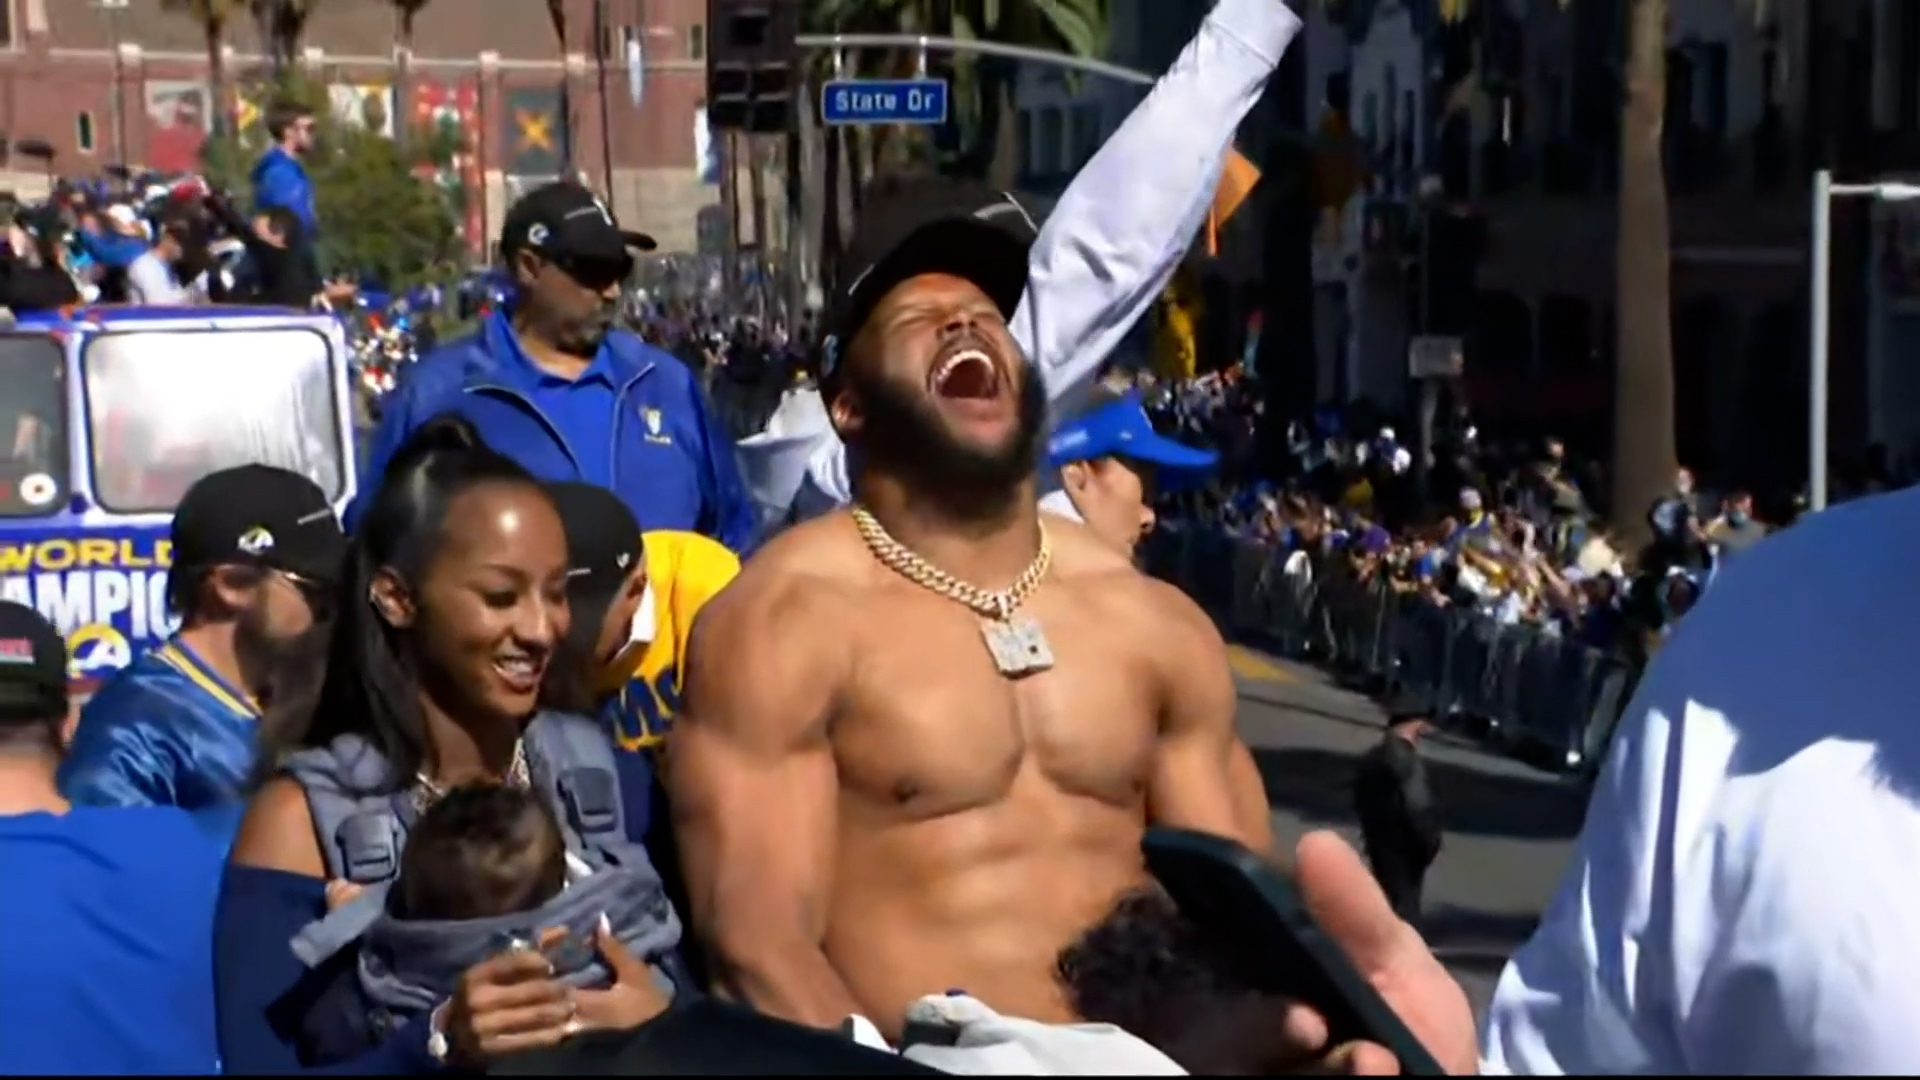 Los Angeles Rams Will Celebrate Super Bowl Win with Parade